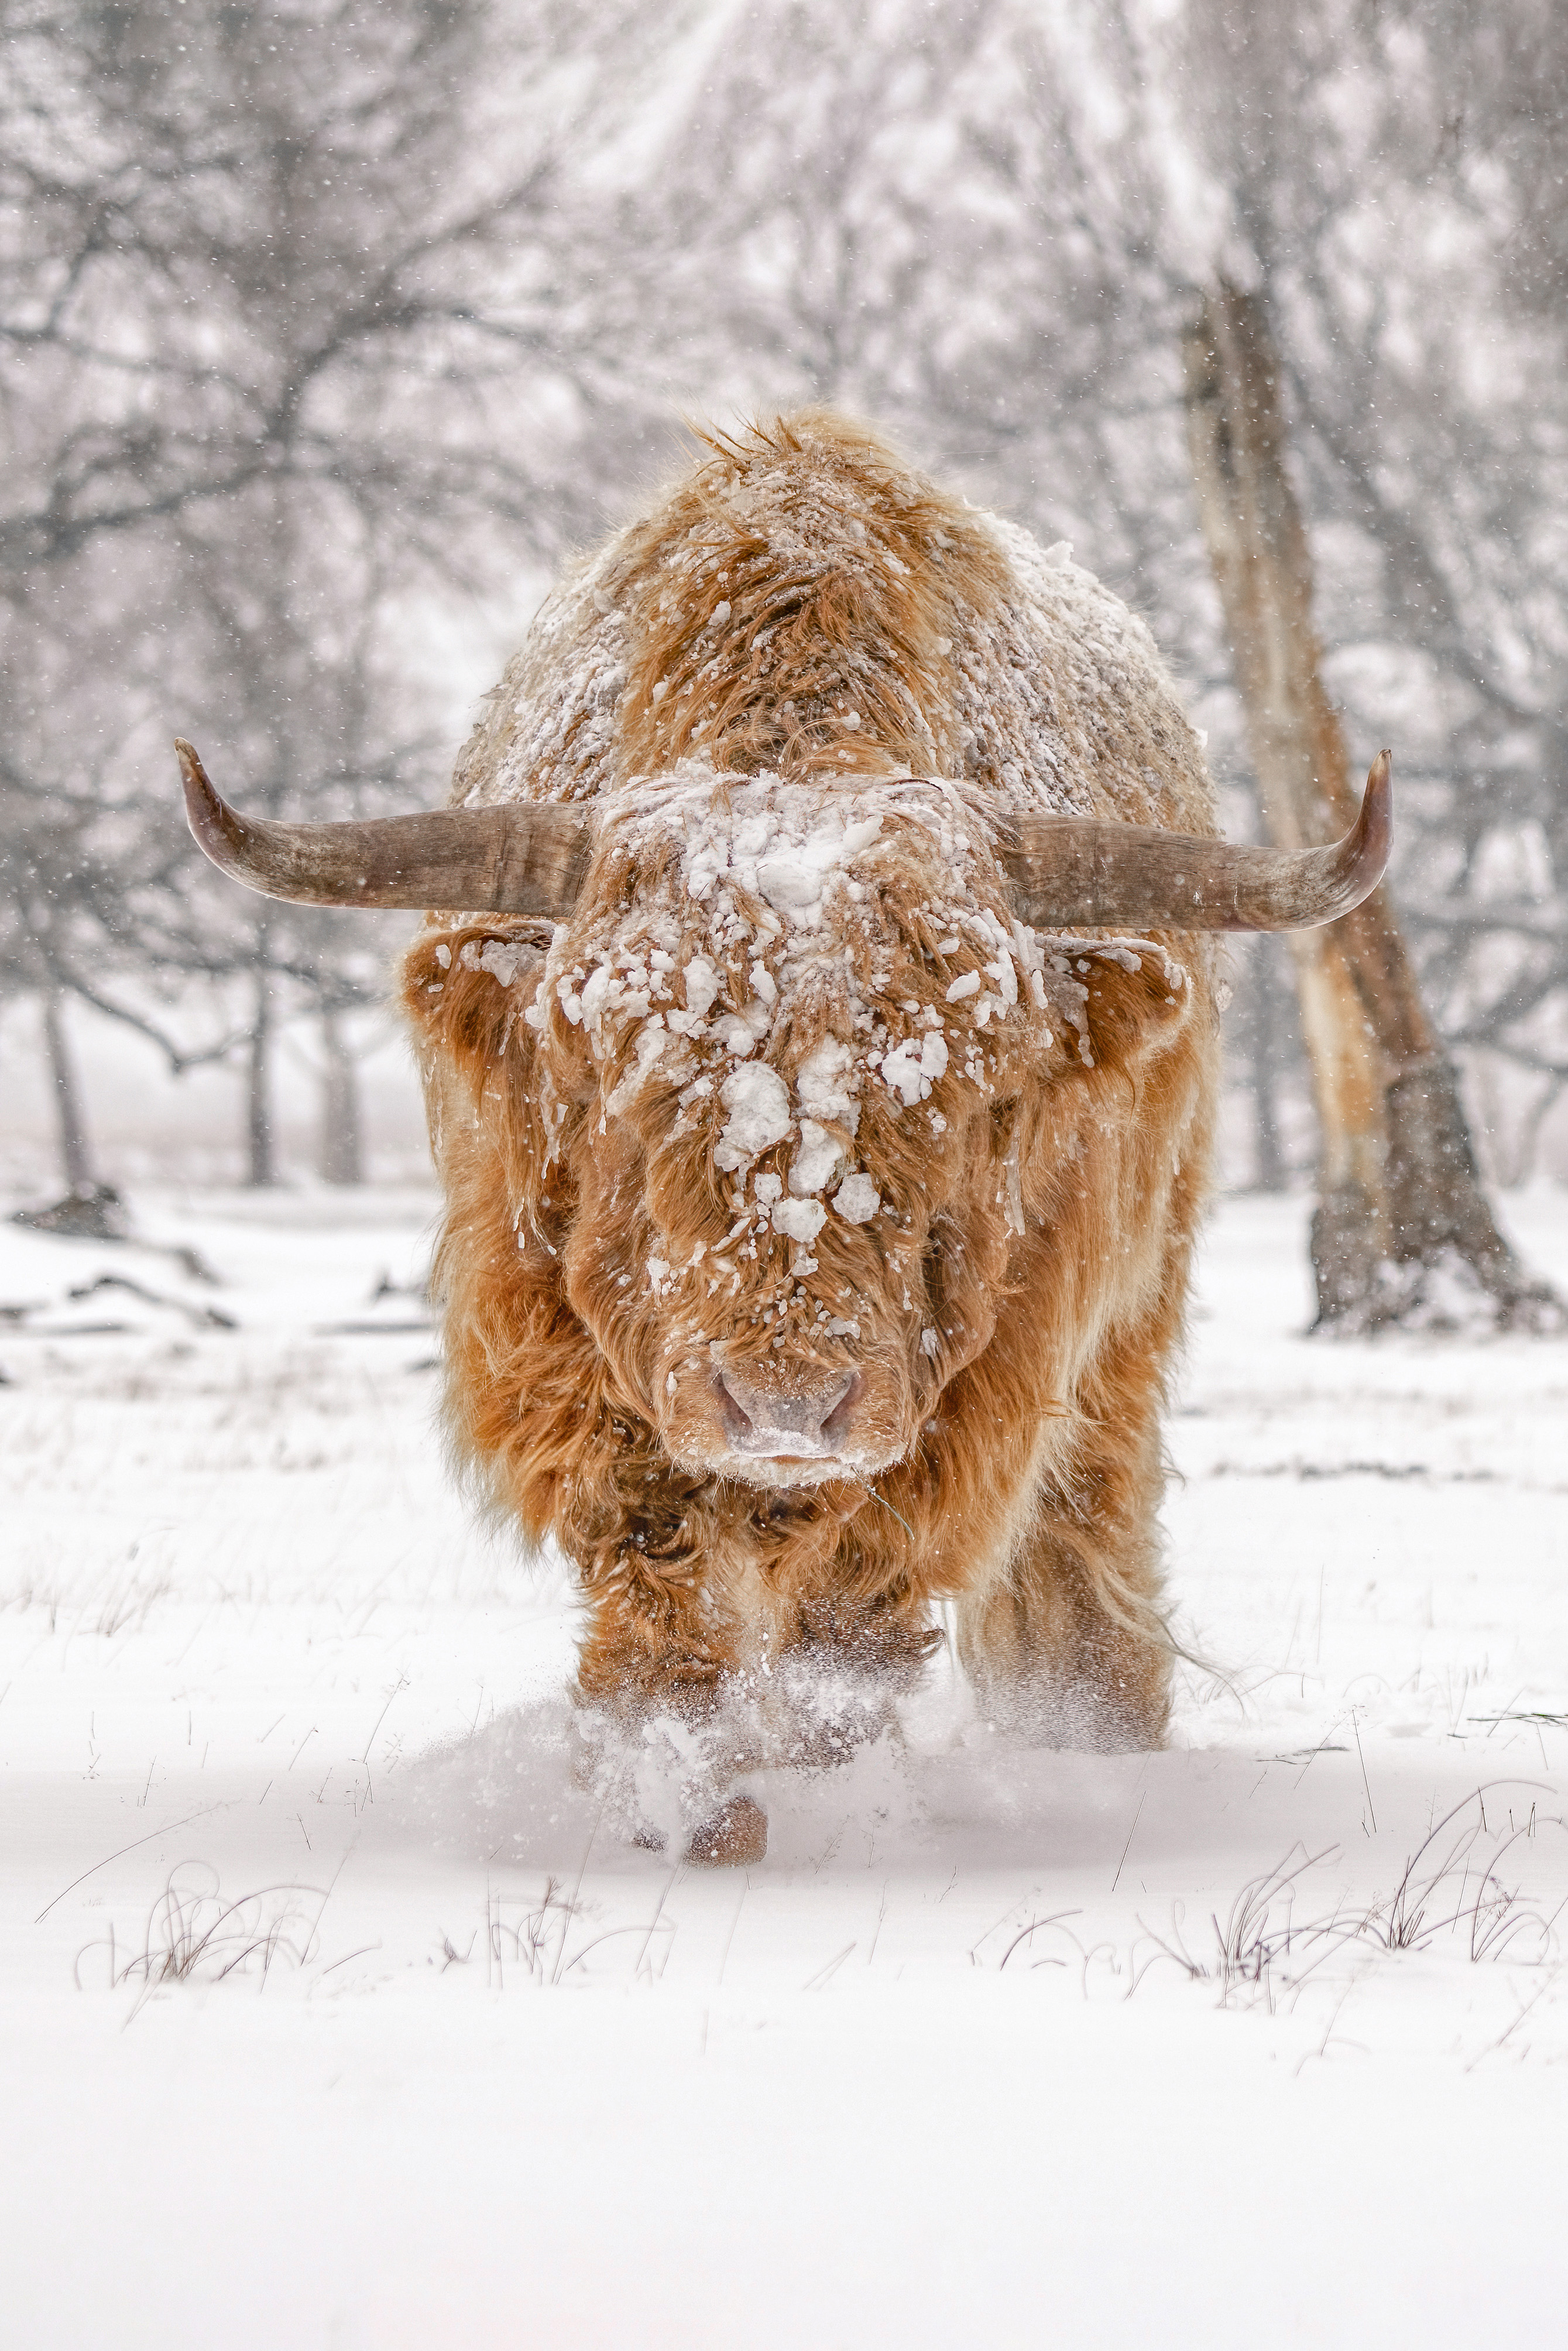 Highland Cattle (Bos taurus taurus) covered with snow and ice in Deelerwoud, the Netherlands.